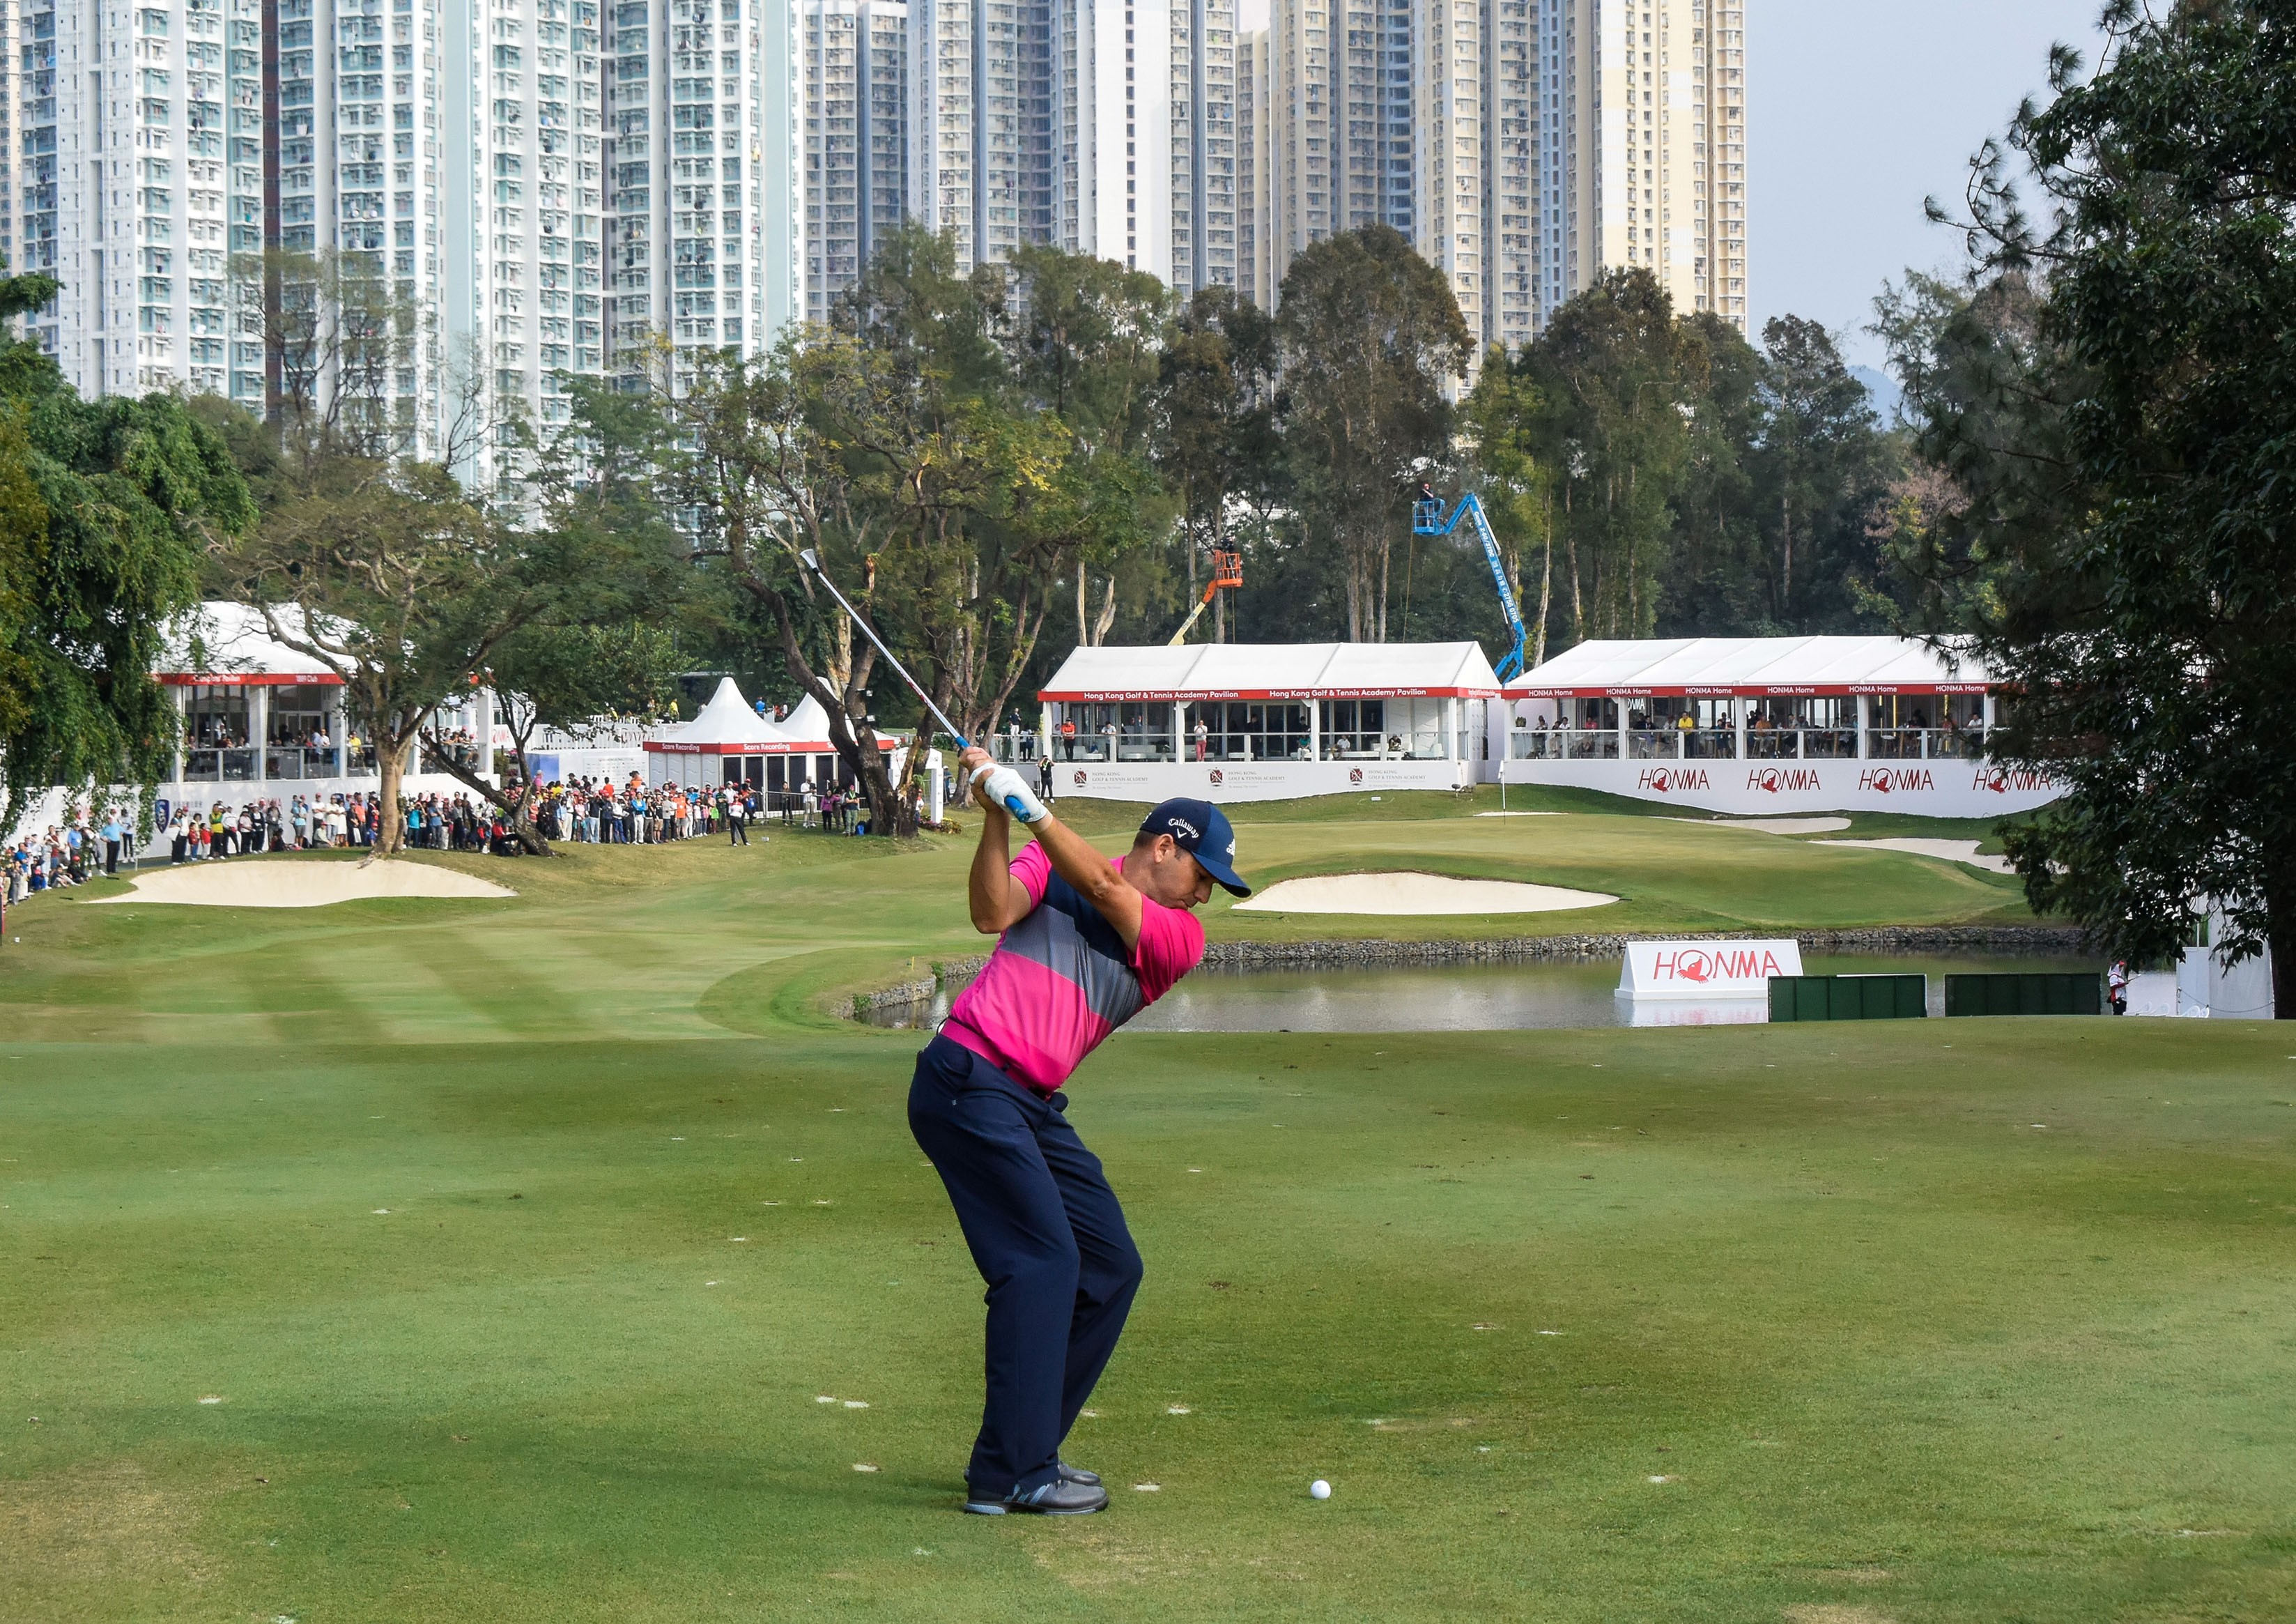 Sergio Garcia hits an approach to the 18th hole at Fanling in 2018. Photo: Richard Castka/sportpixgolf.com